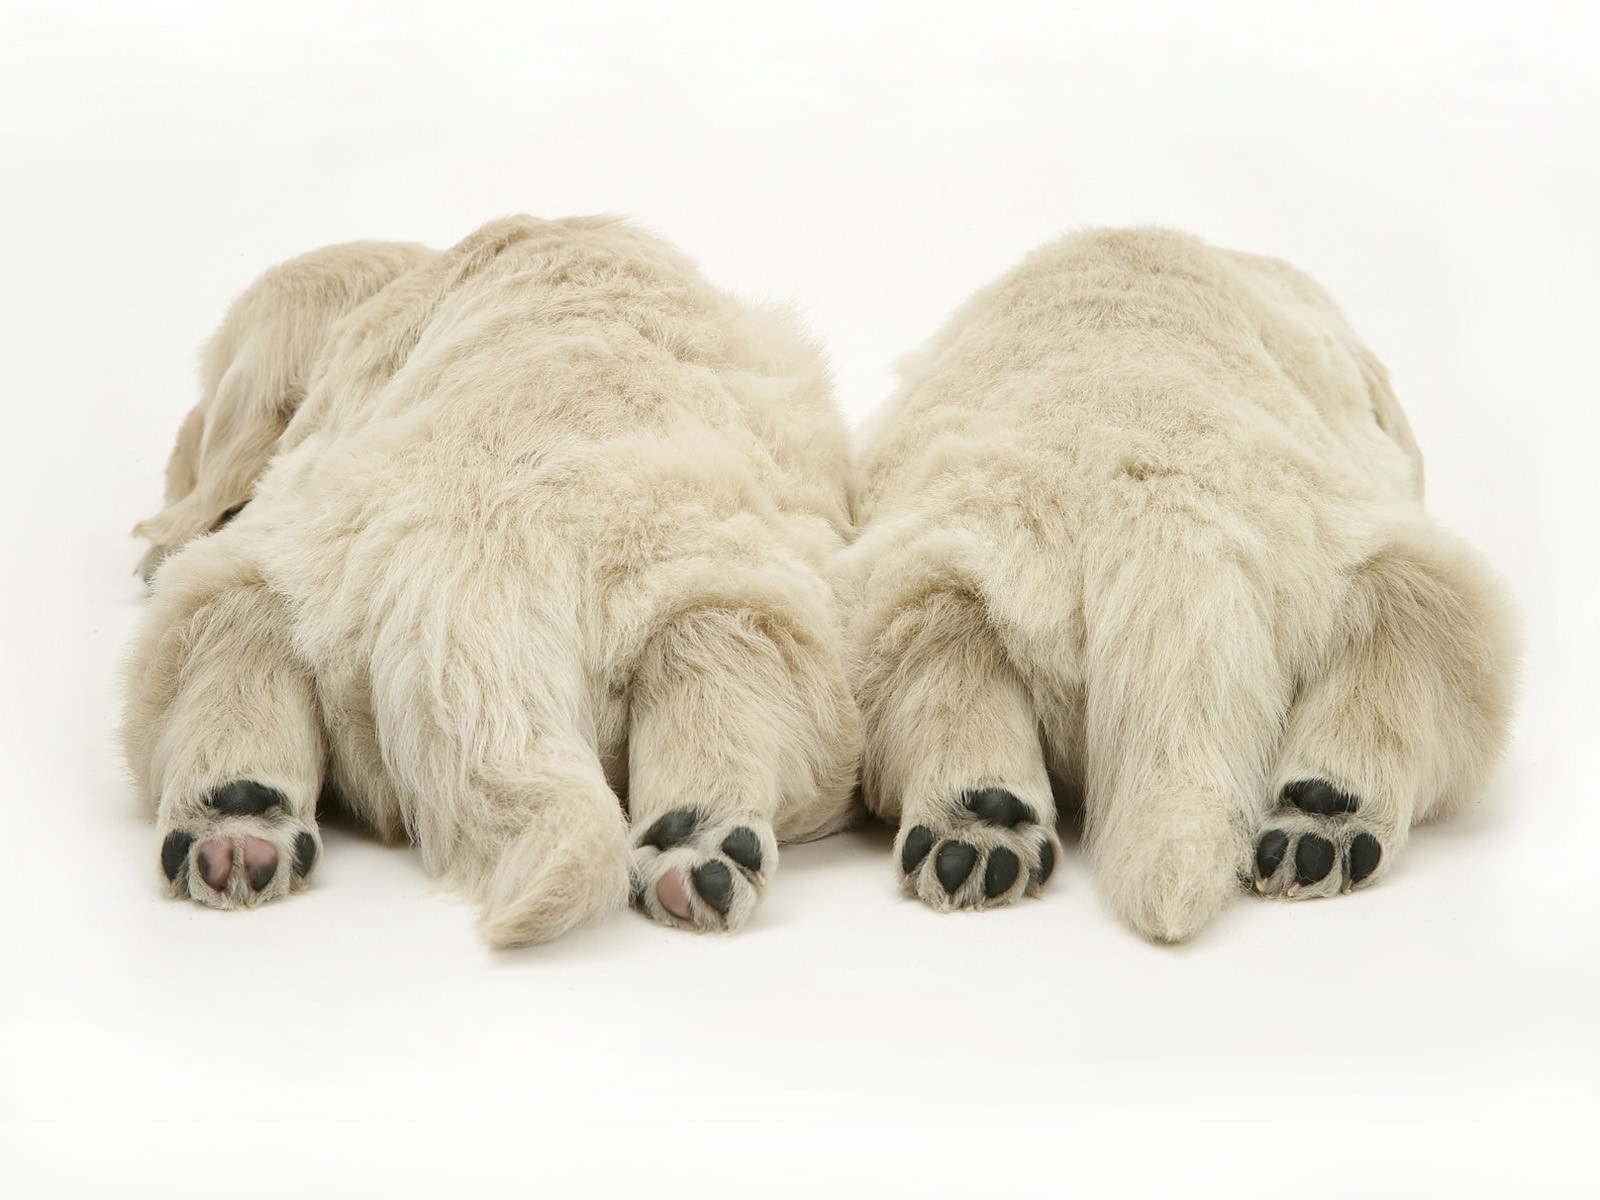 animals dogs paws white background tired 1600x1200 wallpaper High Quality Wallpaper, High Definition Wallpaper